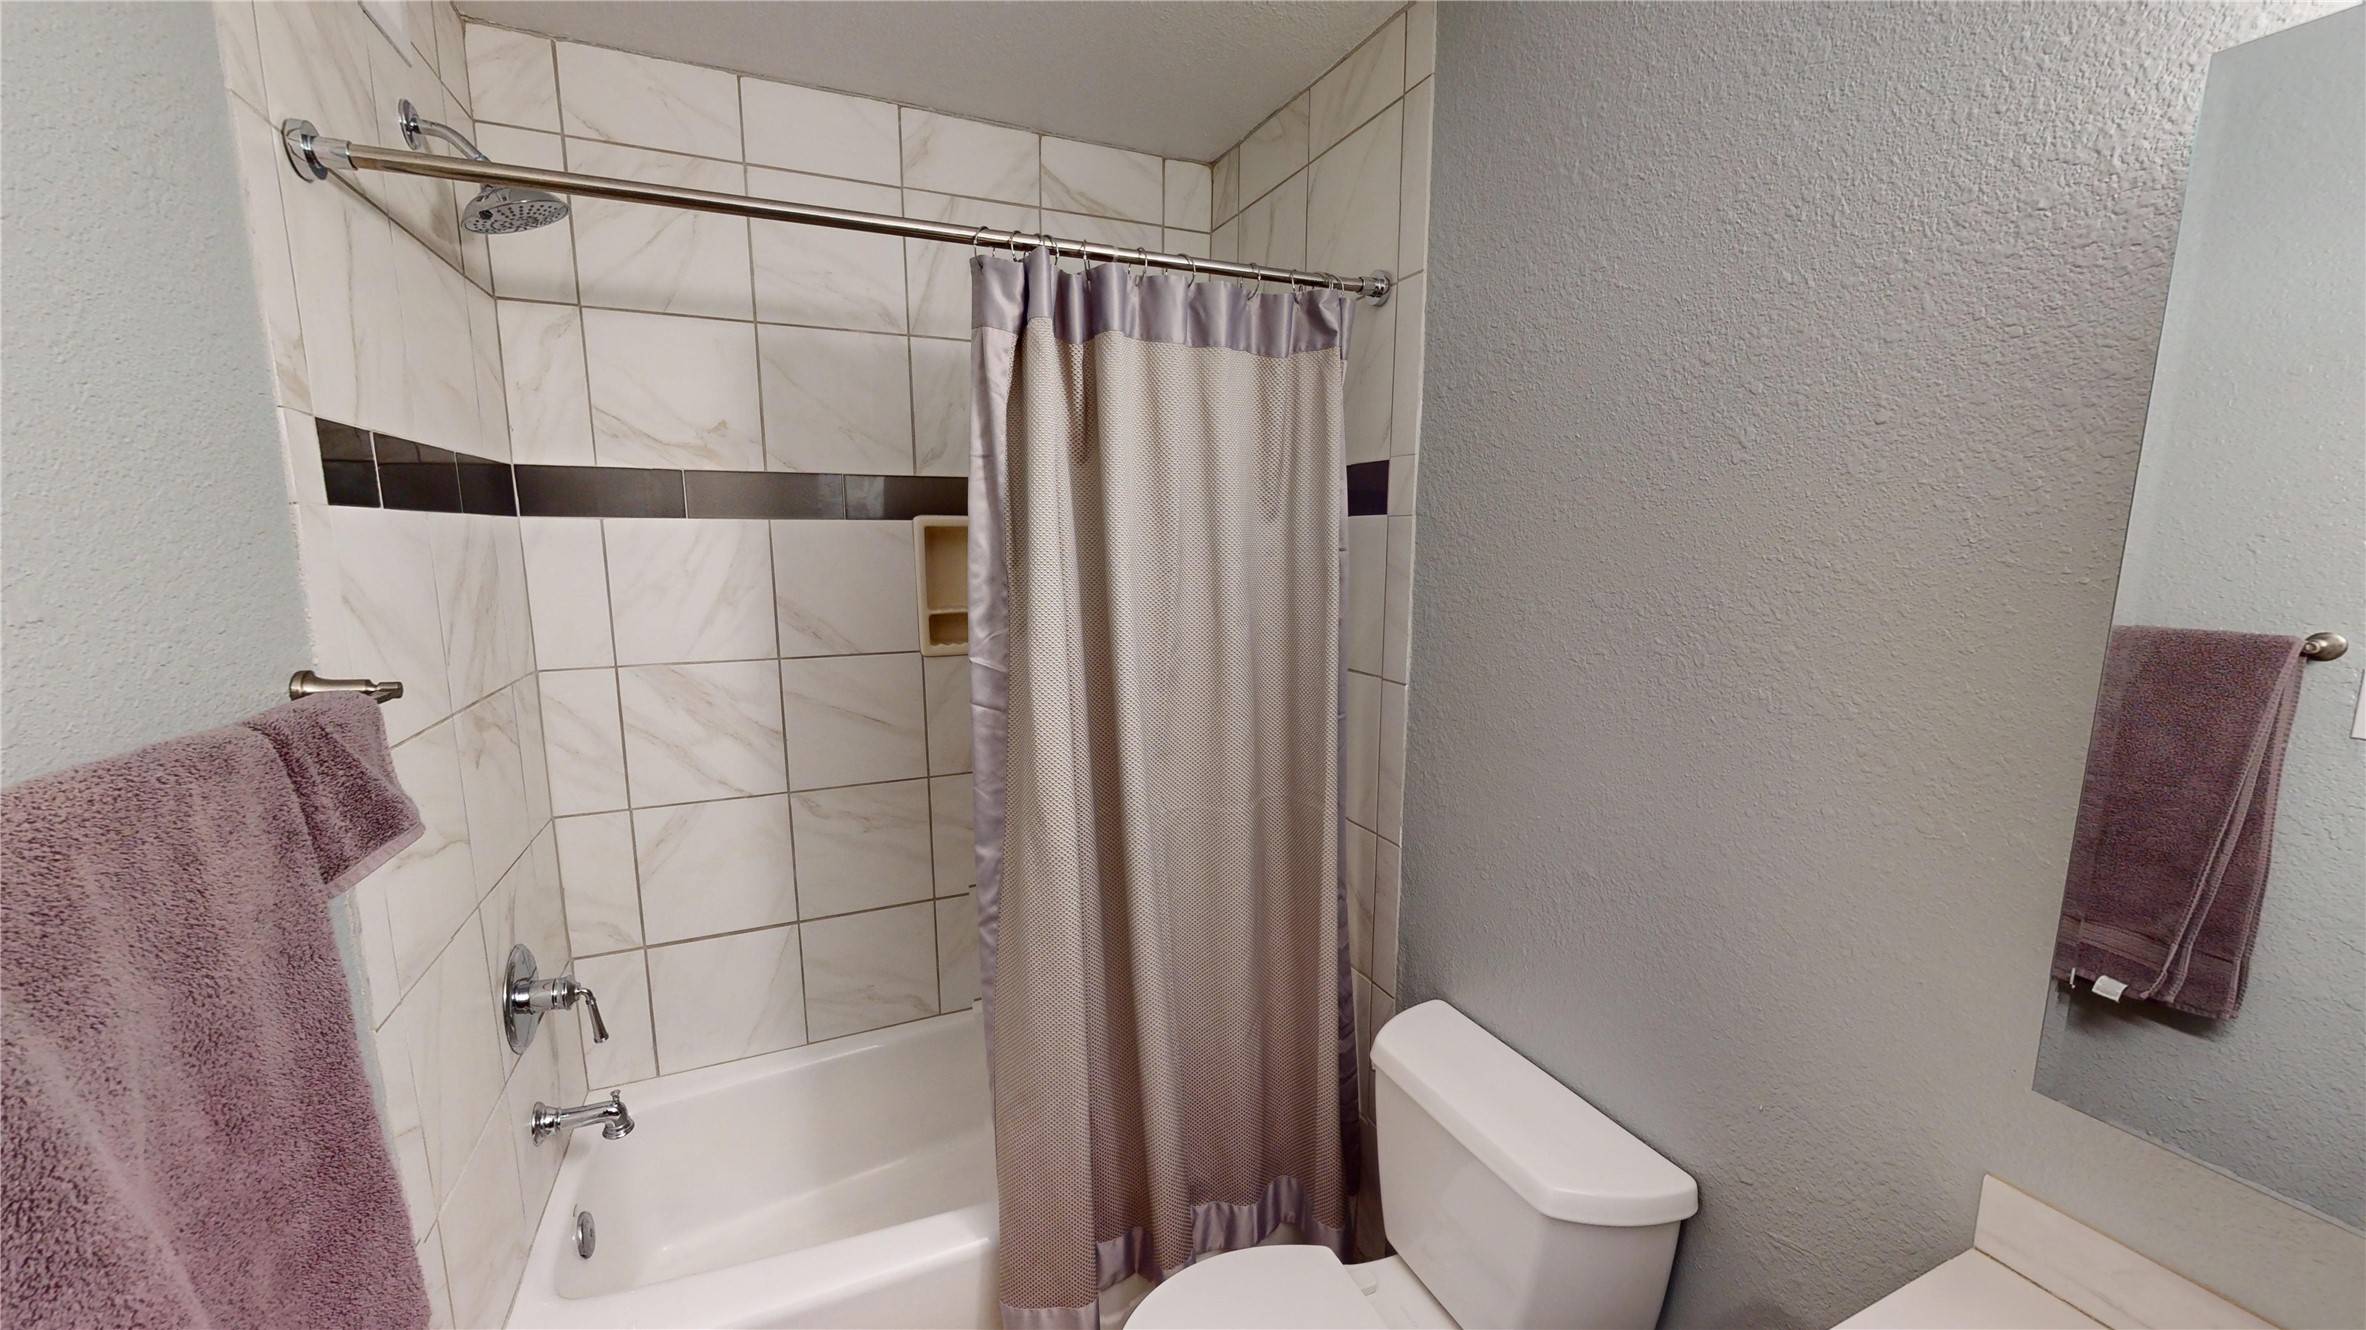 3055 Trinity Drive 414, Los Alamos, New Mexico 87544, 1 Bedroom Bedrooms, ,1 BathroomBathrooms,Residential,For Sale,3055 Trinity Drive 414,202401488